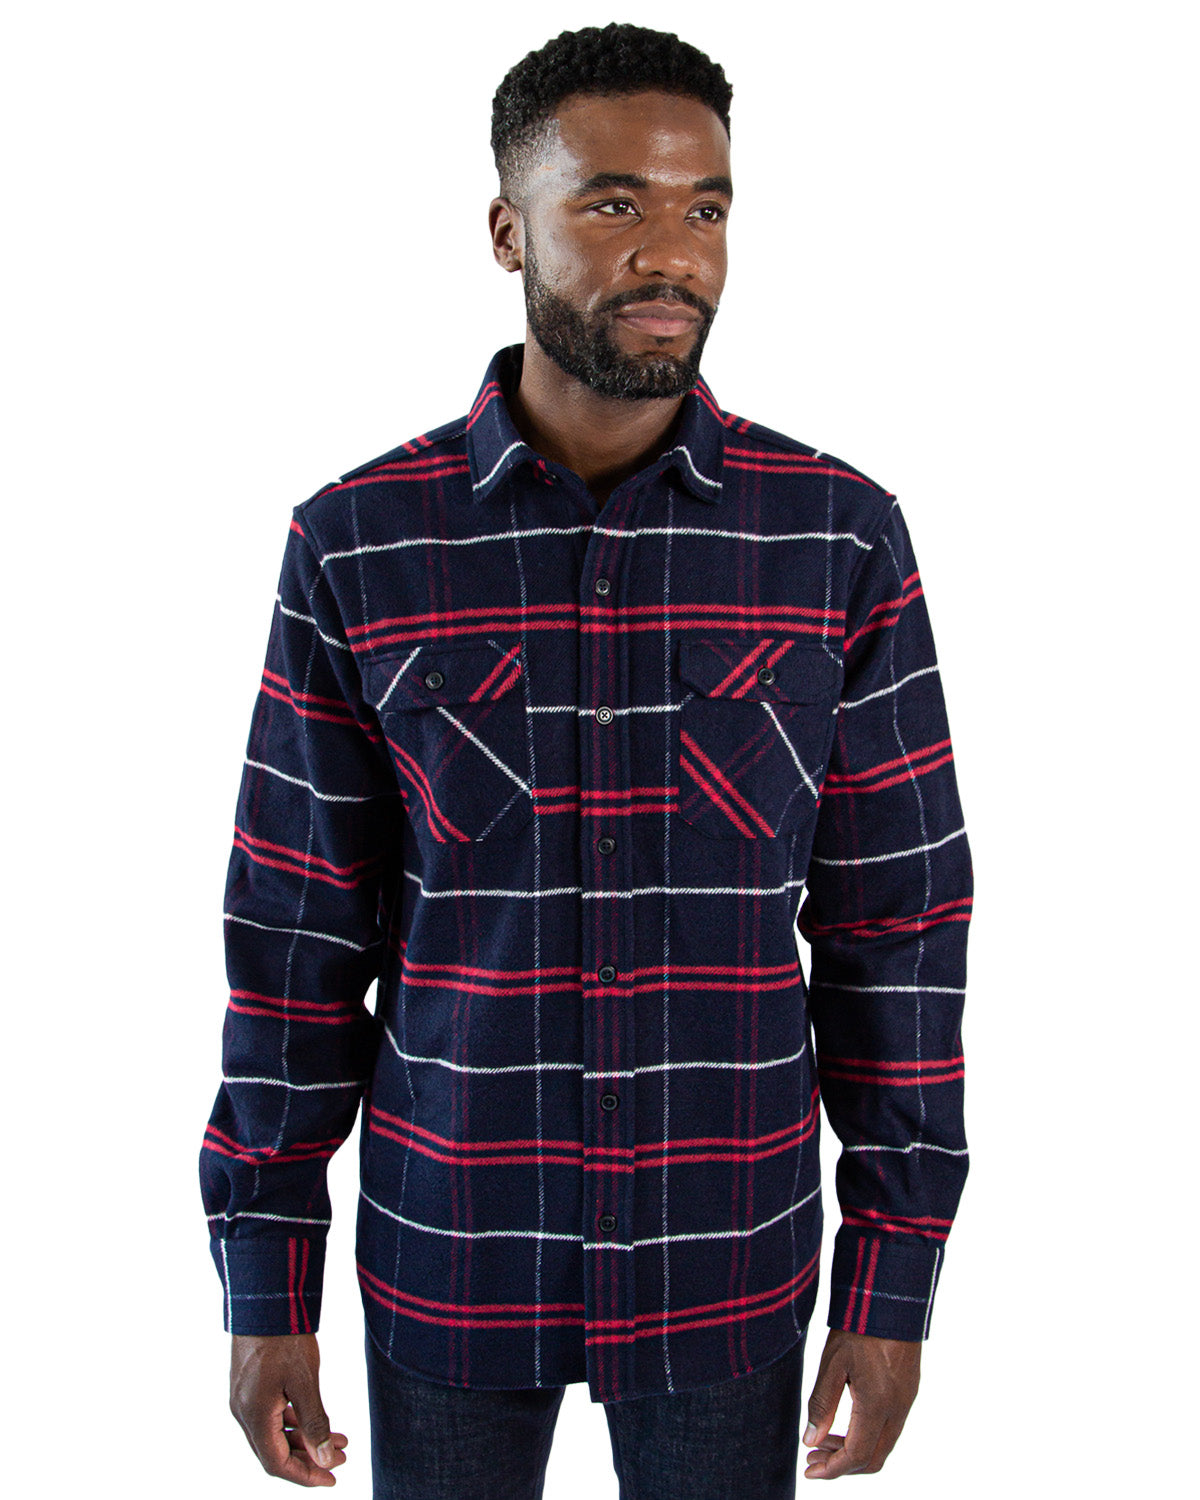 Soft Flannel Shirt for Men in 100% Cotton, The Grand Flannel in 